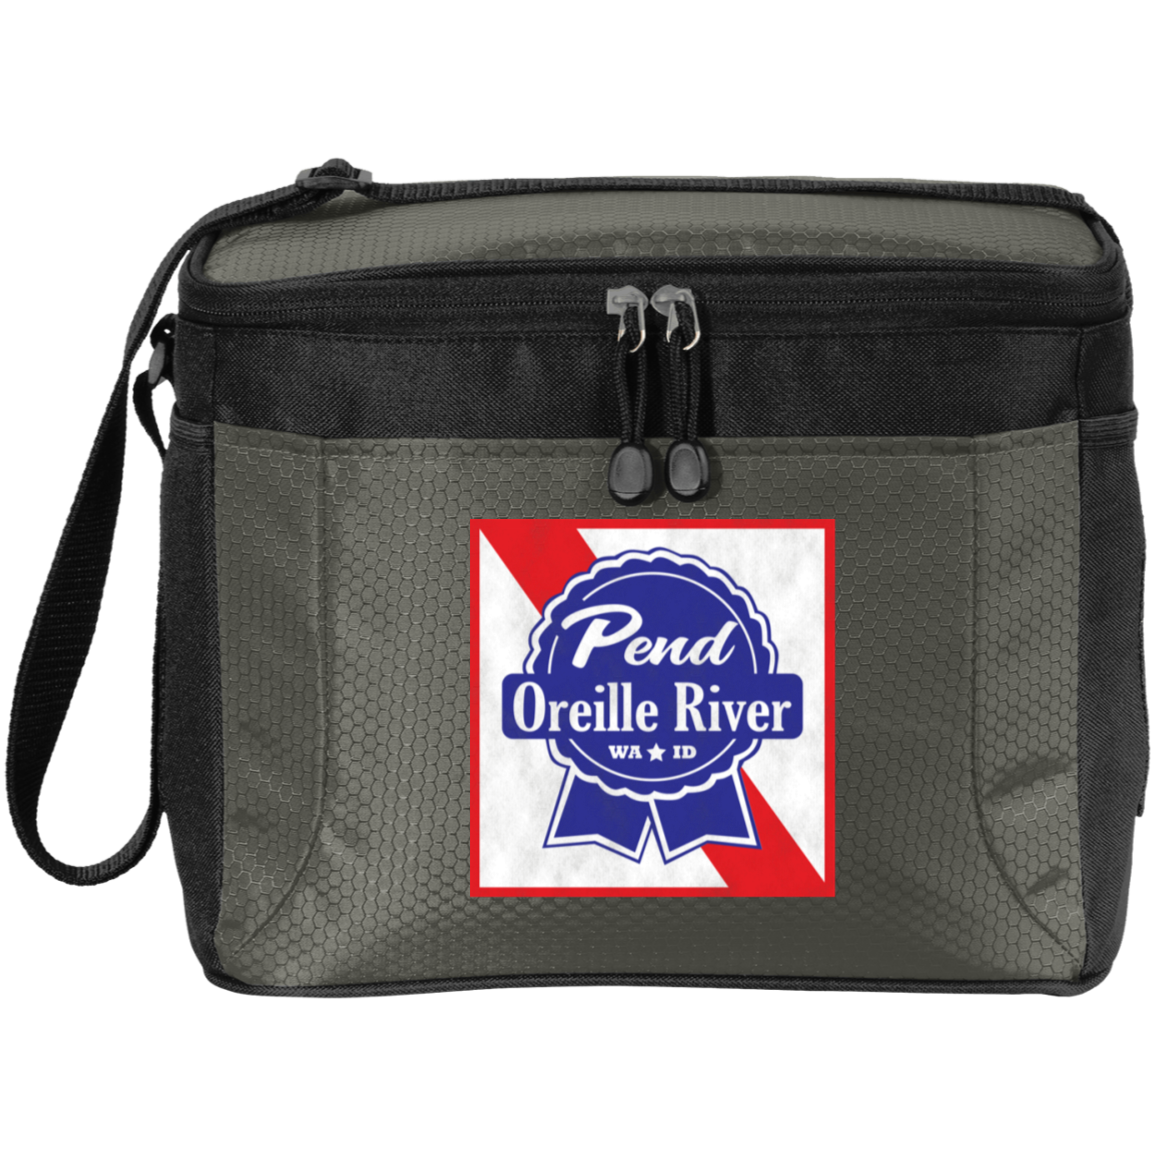 PBR Style 12-Pack Cooler